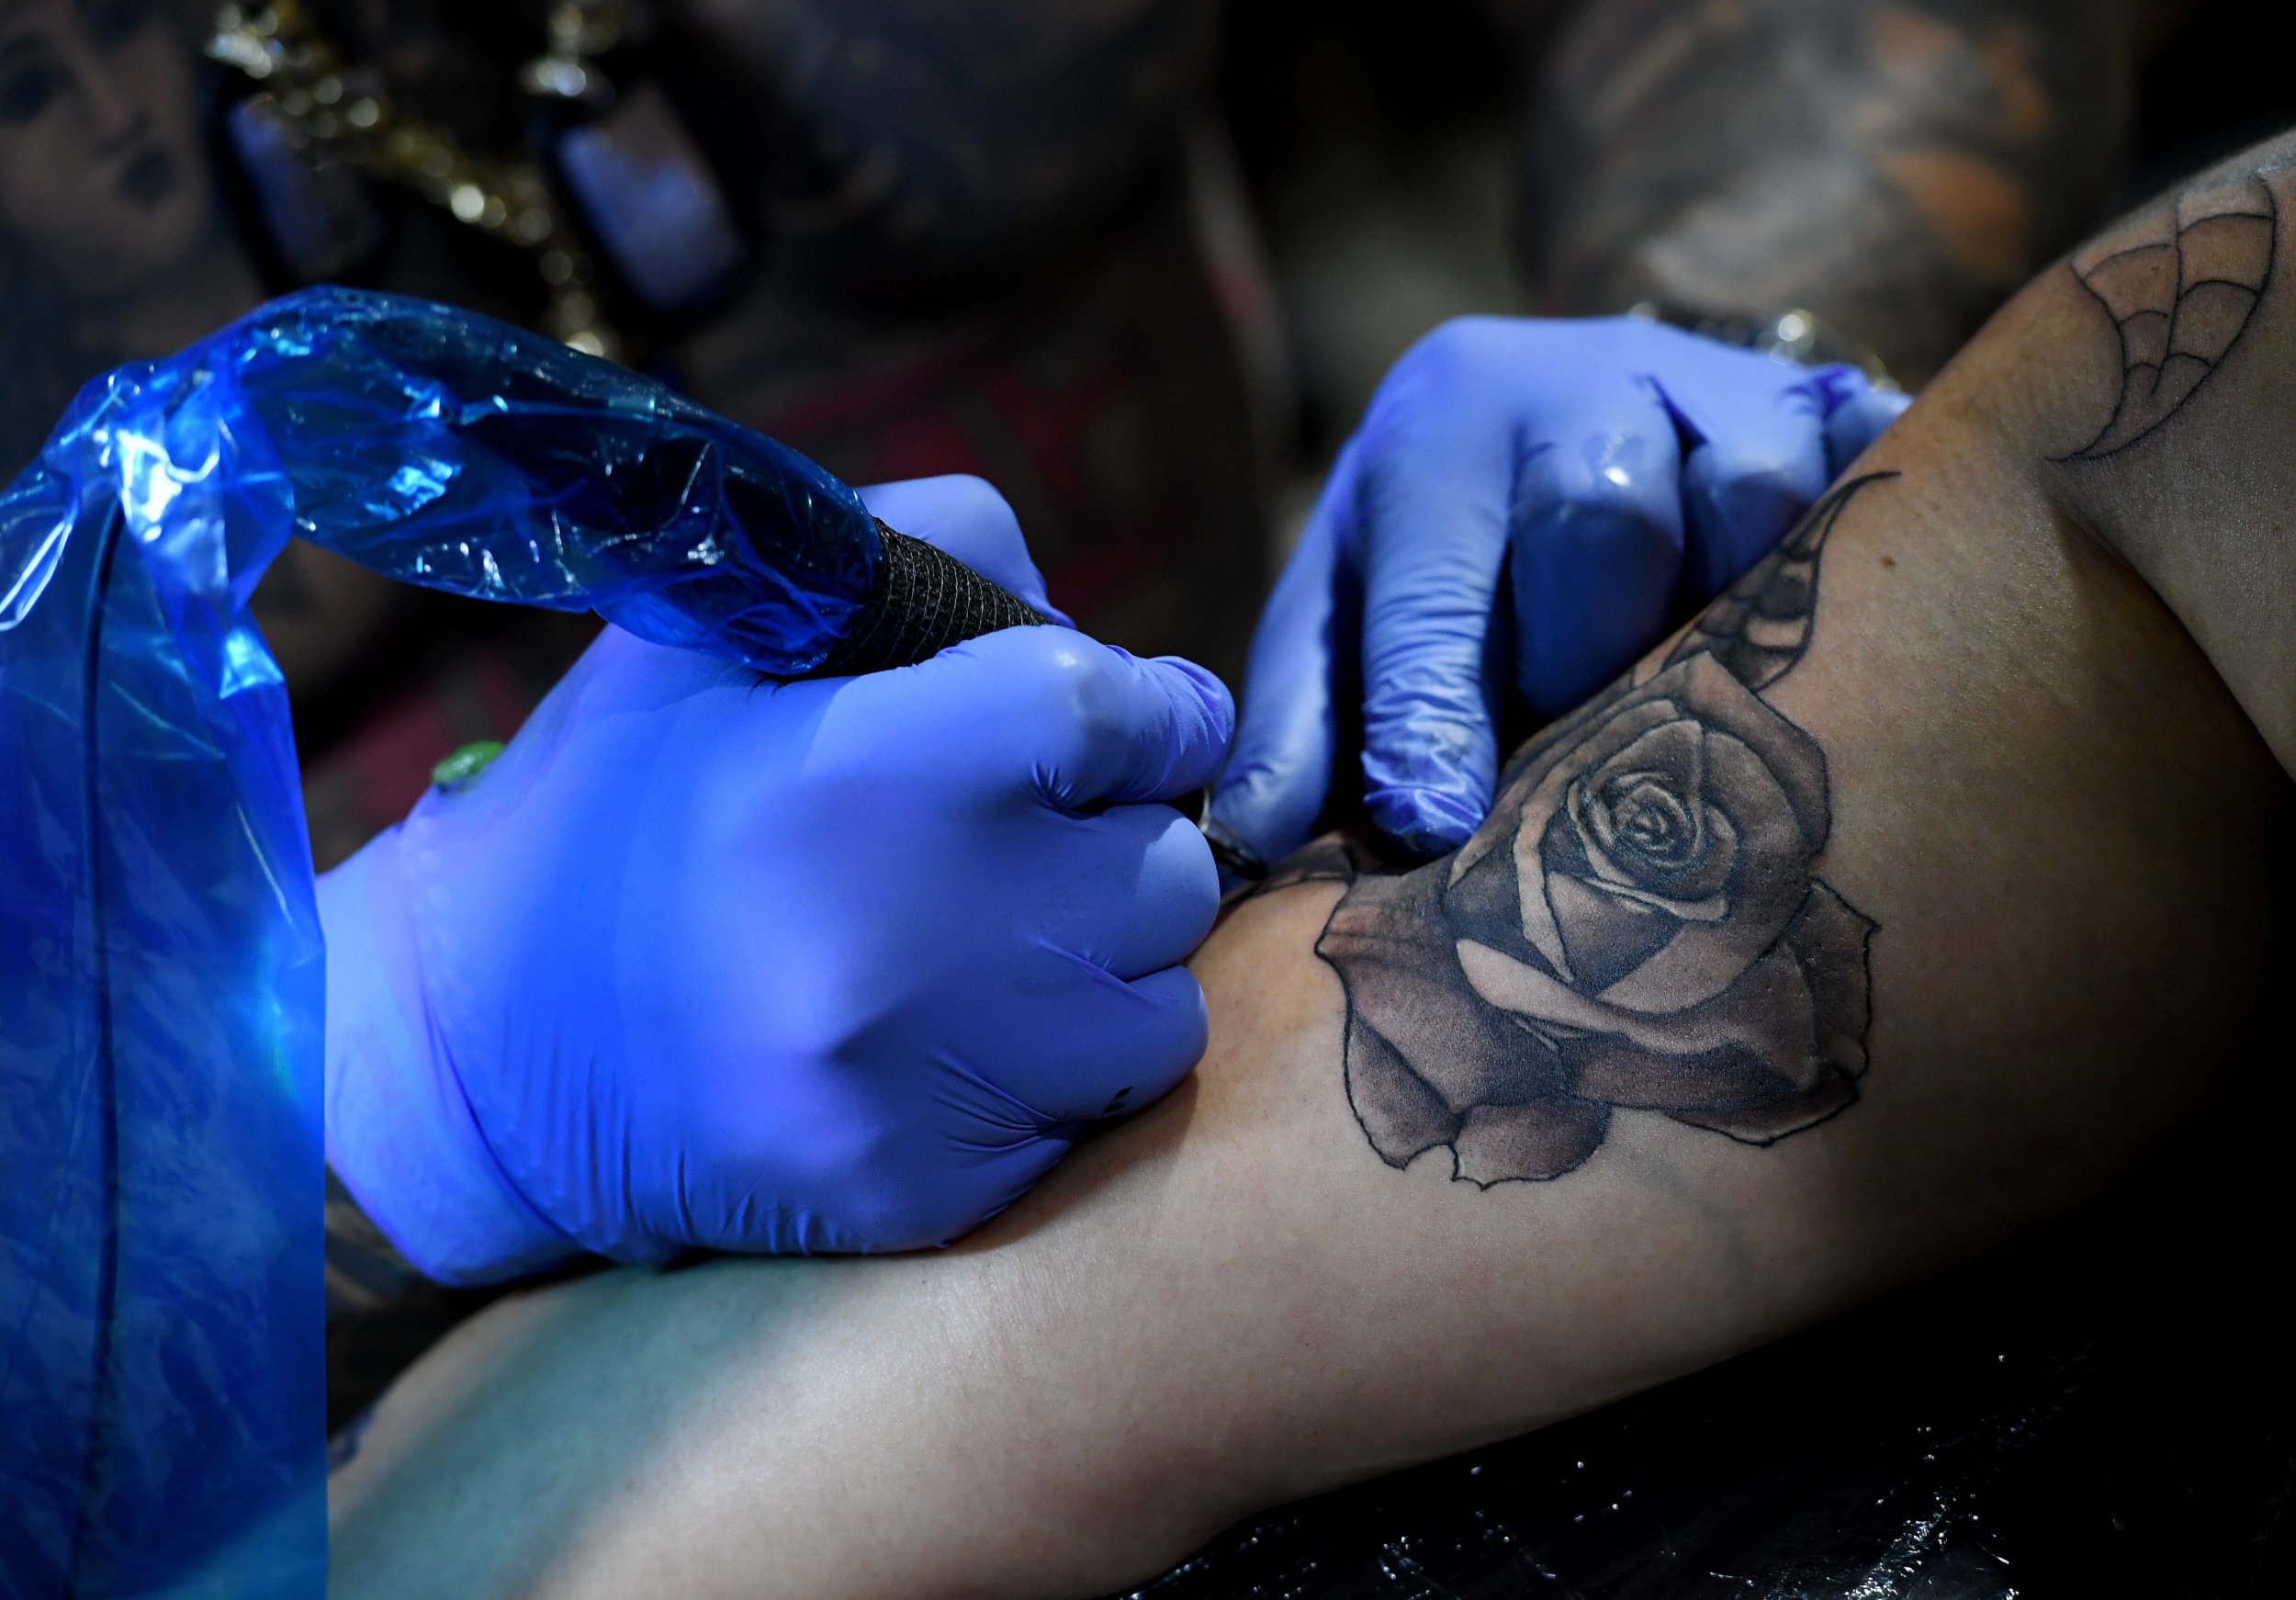 Getting A Tattoo? Here Are the Things to Know Before Getting Inked